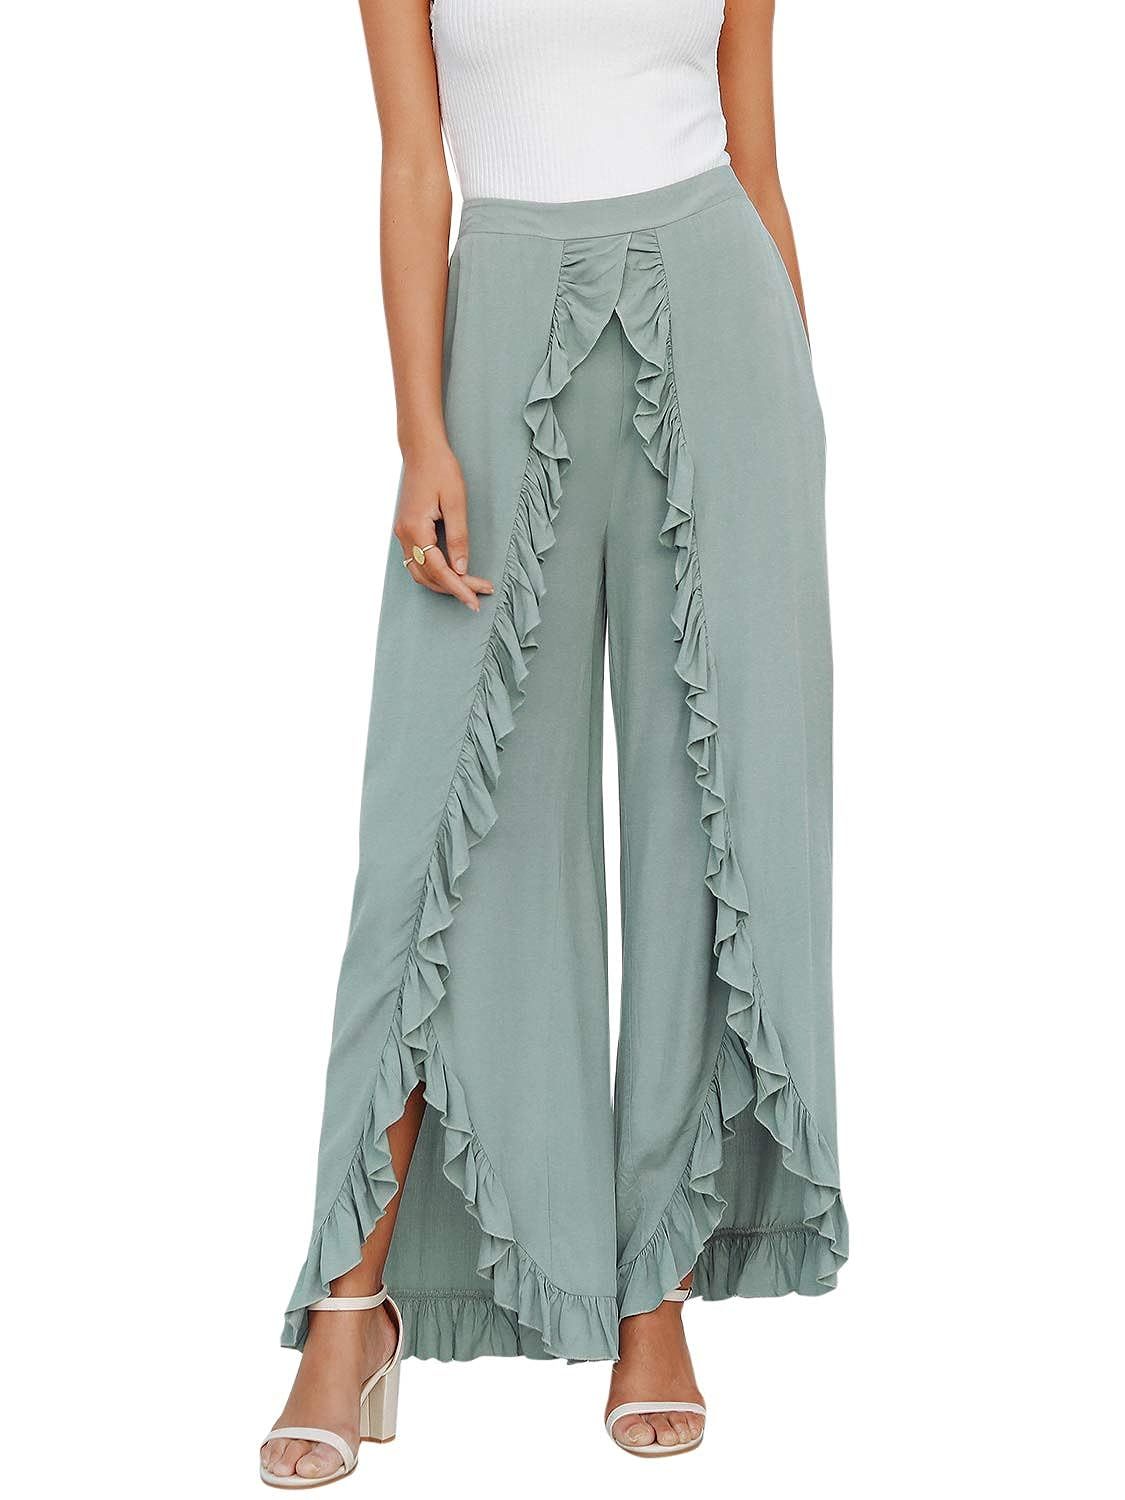 Simplee Women's Summer Casual Palazzo Pants Striped Loose Wide Leg Pants | Amazon (US)